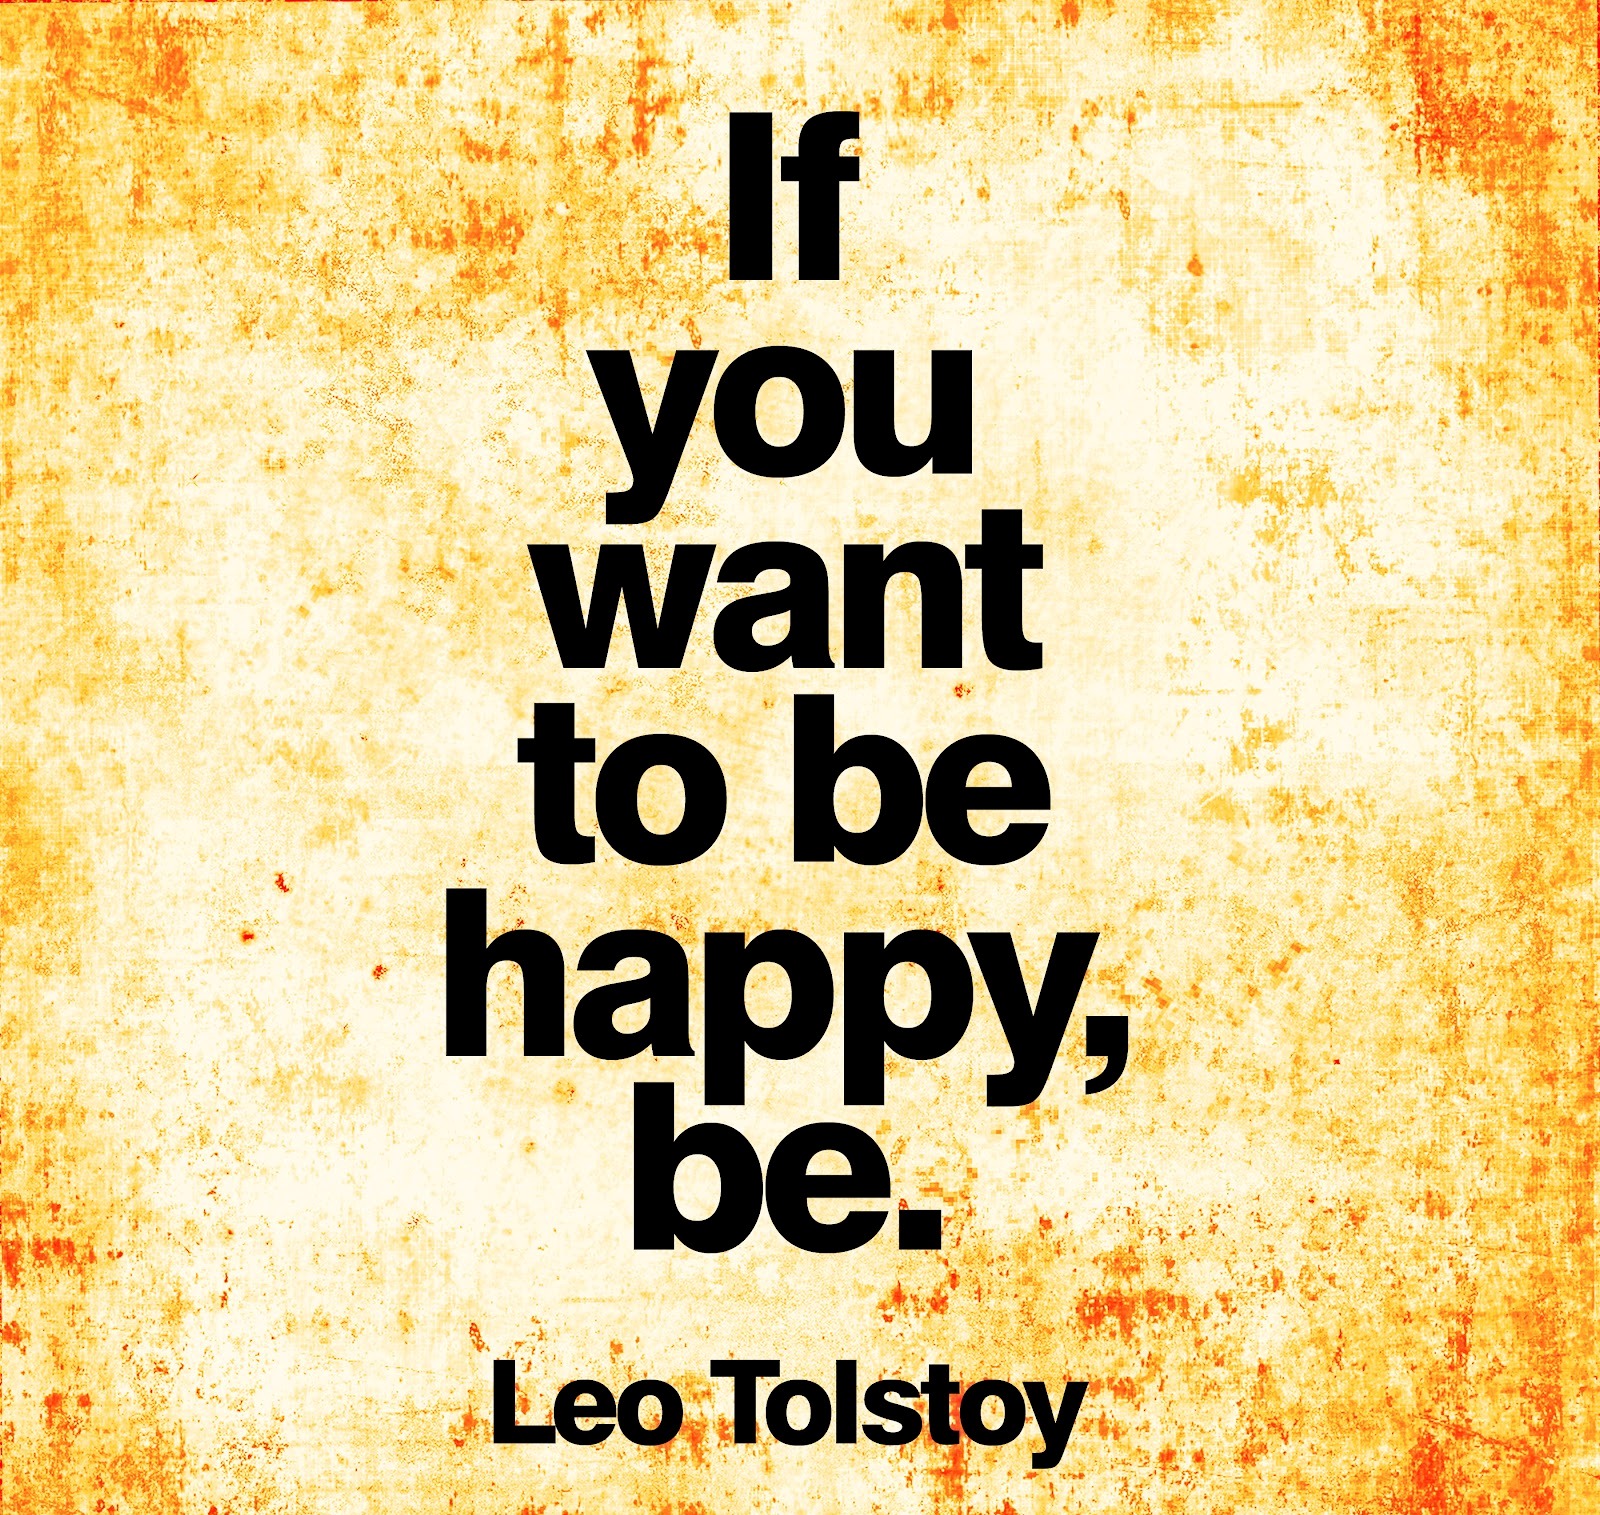 if-you-want-to-be-happy-be-leo-tolstoy-copy.jpg